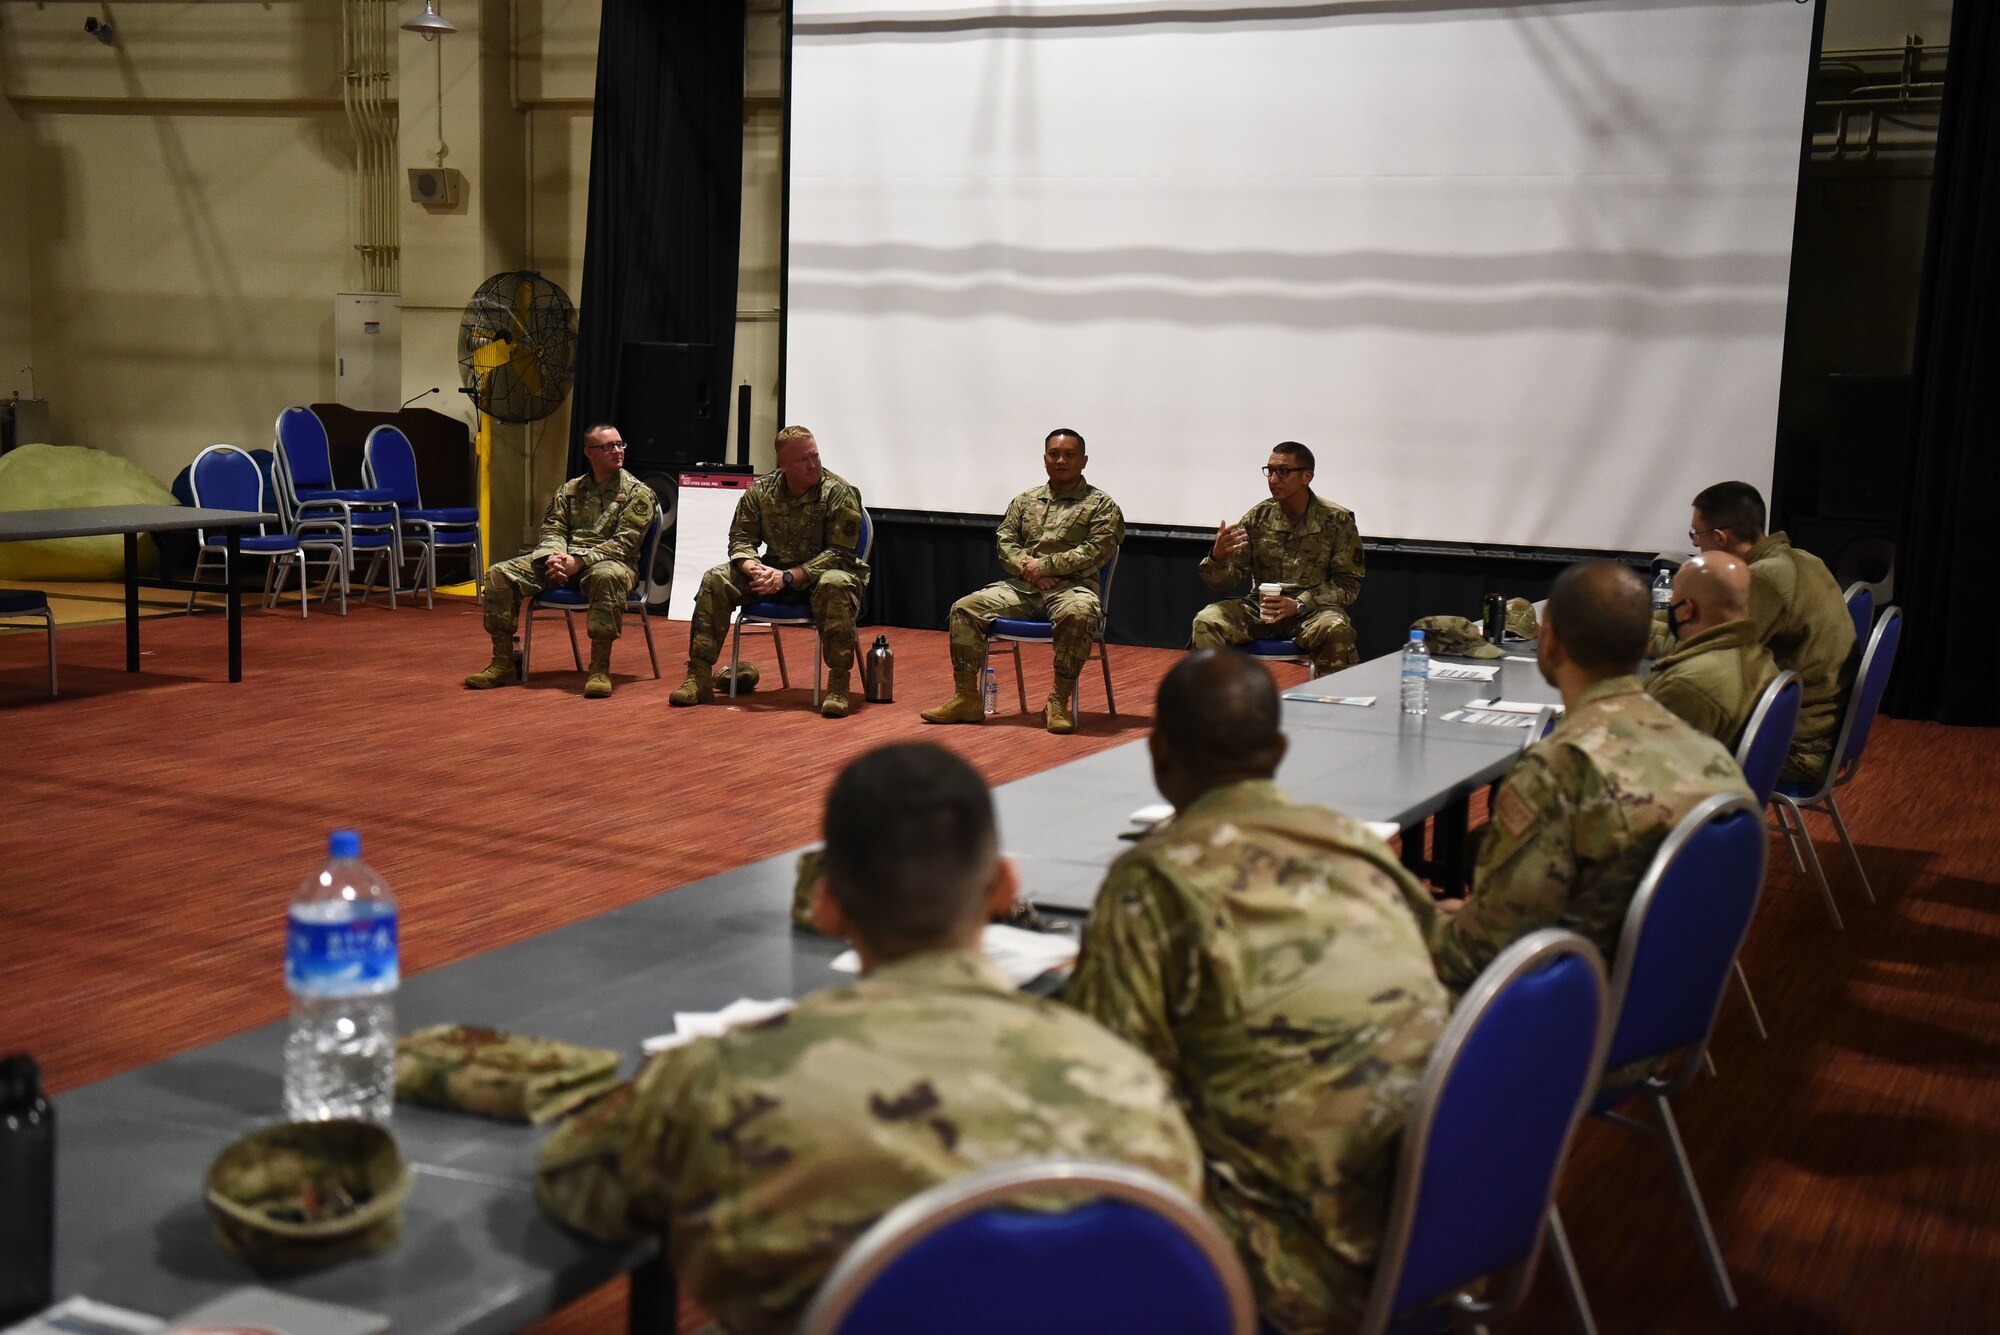 Four military members sit as a panel in front of other military members.